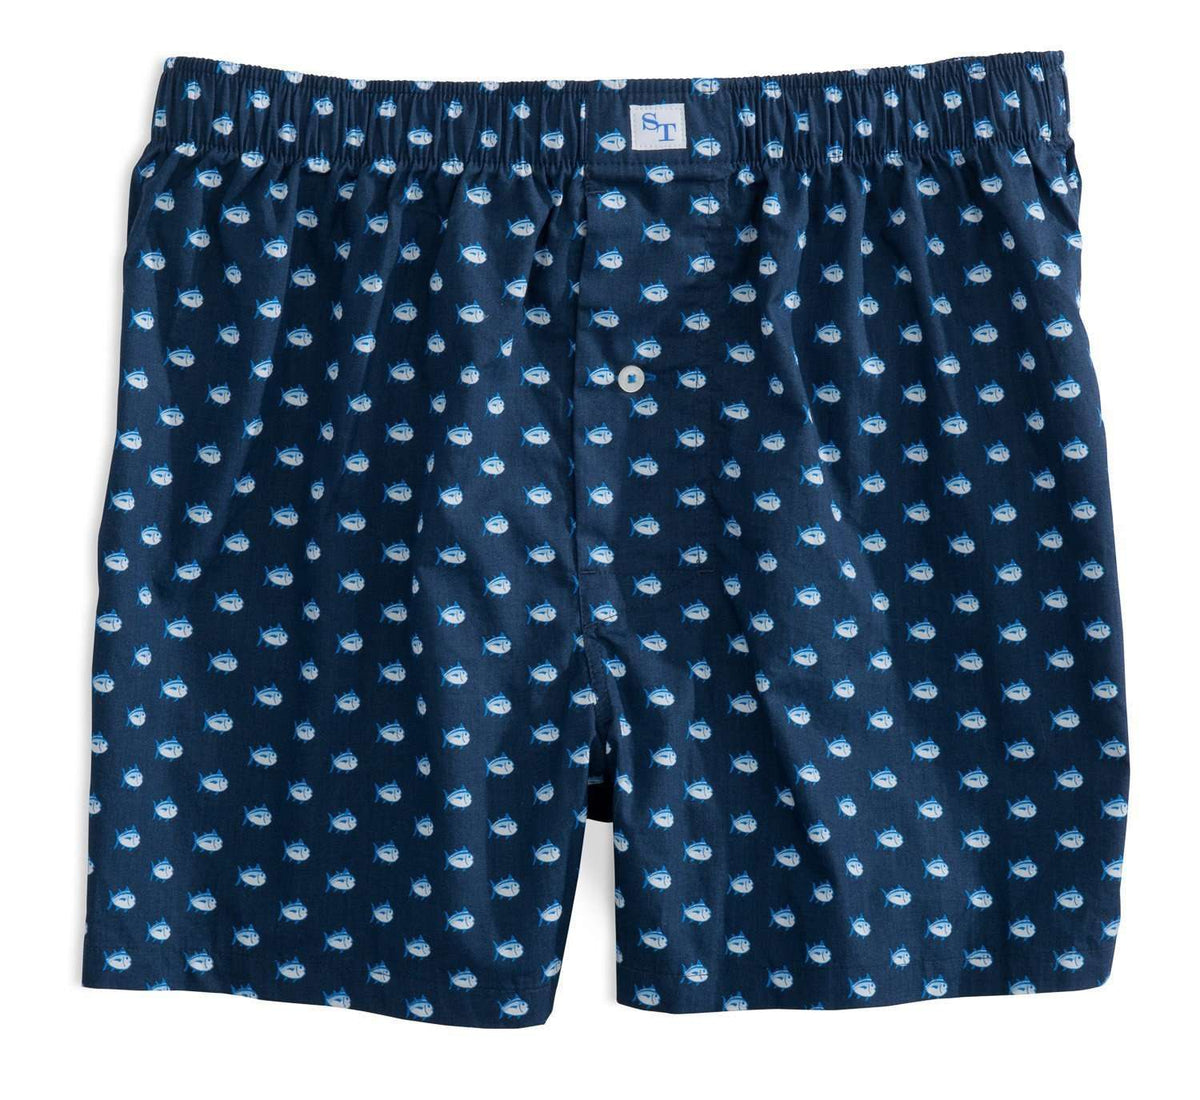 Skipjack Boxers in True Navy by Southern Tide - Country Club Prep